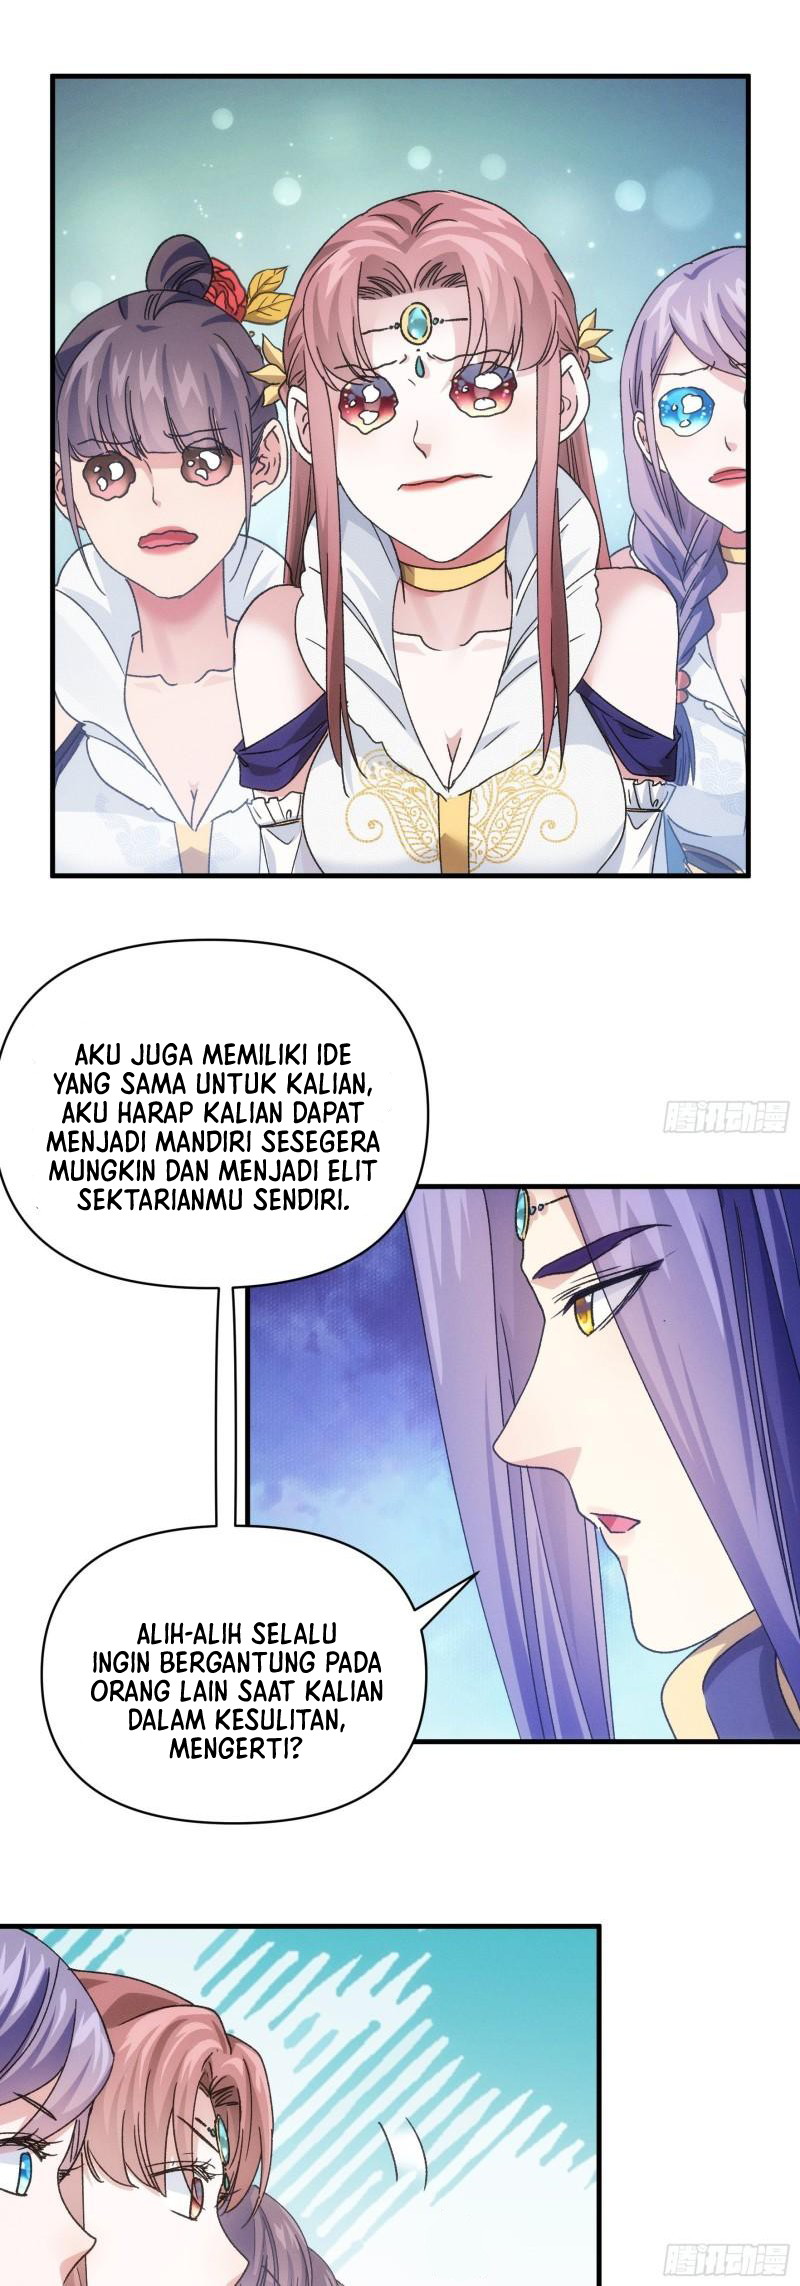 Dilarang COPAS - situs resmi www.mangacanblog.com - Komik i just dont play the card according to the routine 095 - chapter 95 96 Indonesia i just dont play the card according to the routine 095 - chapter 95 Terbaru 19|Baca Manga Komik Indonesia|Mangacan